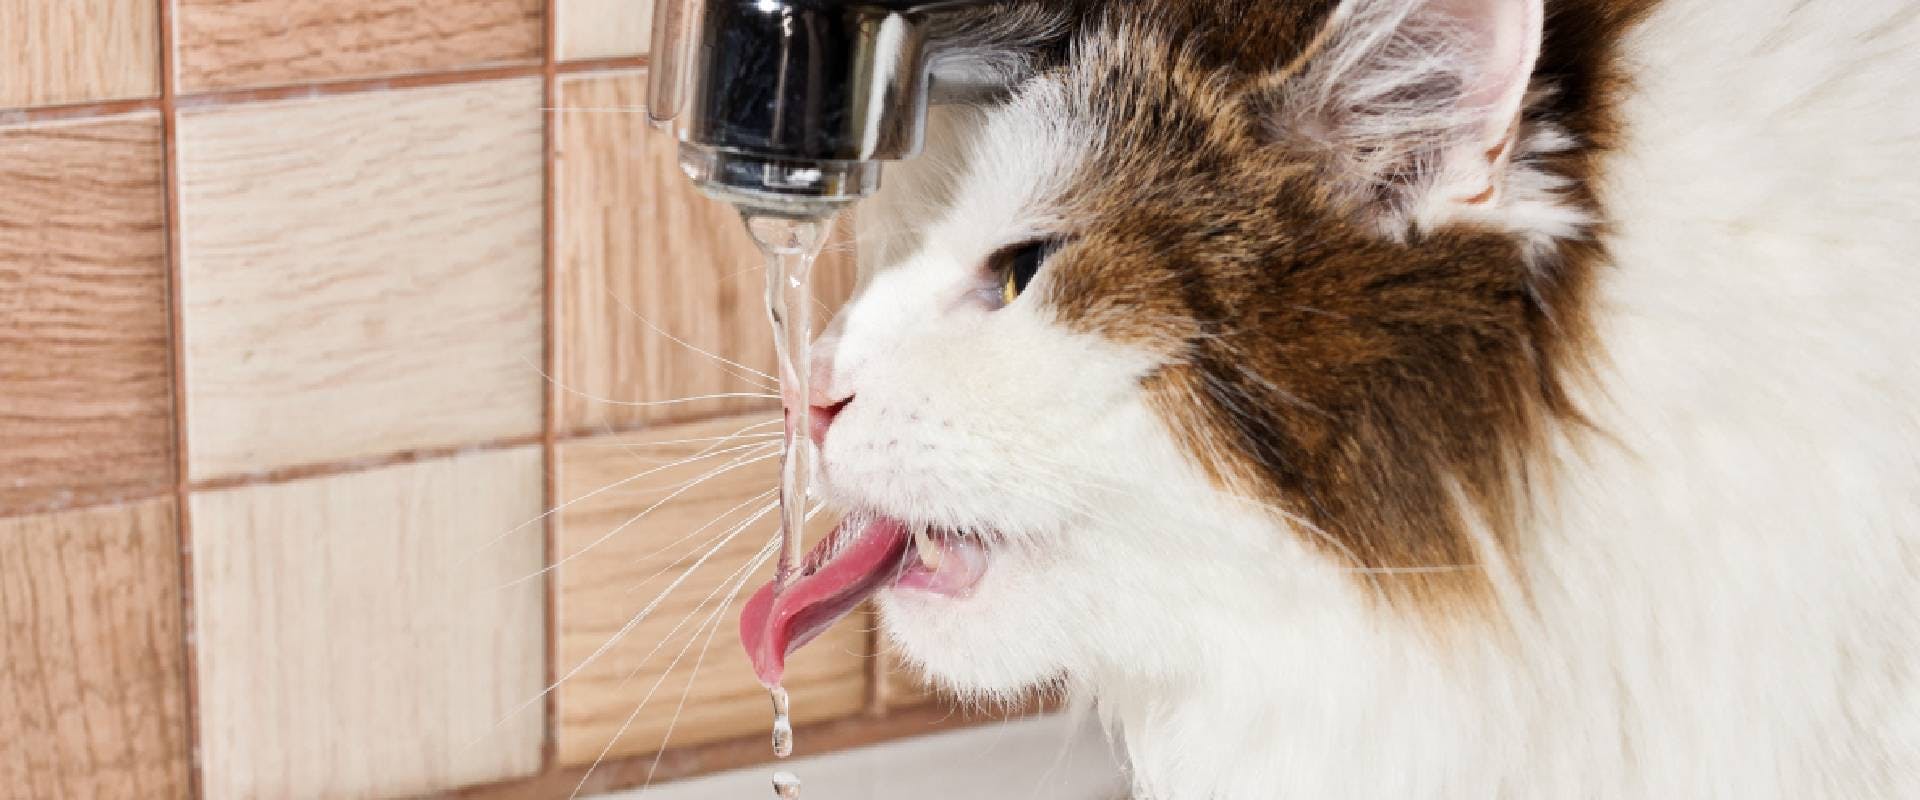 Cat lapping at water from a tap